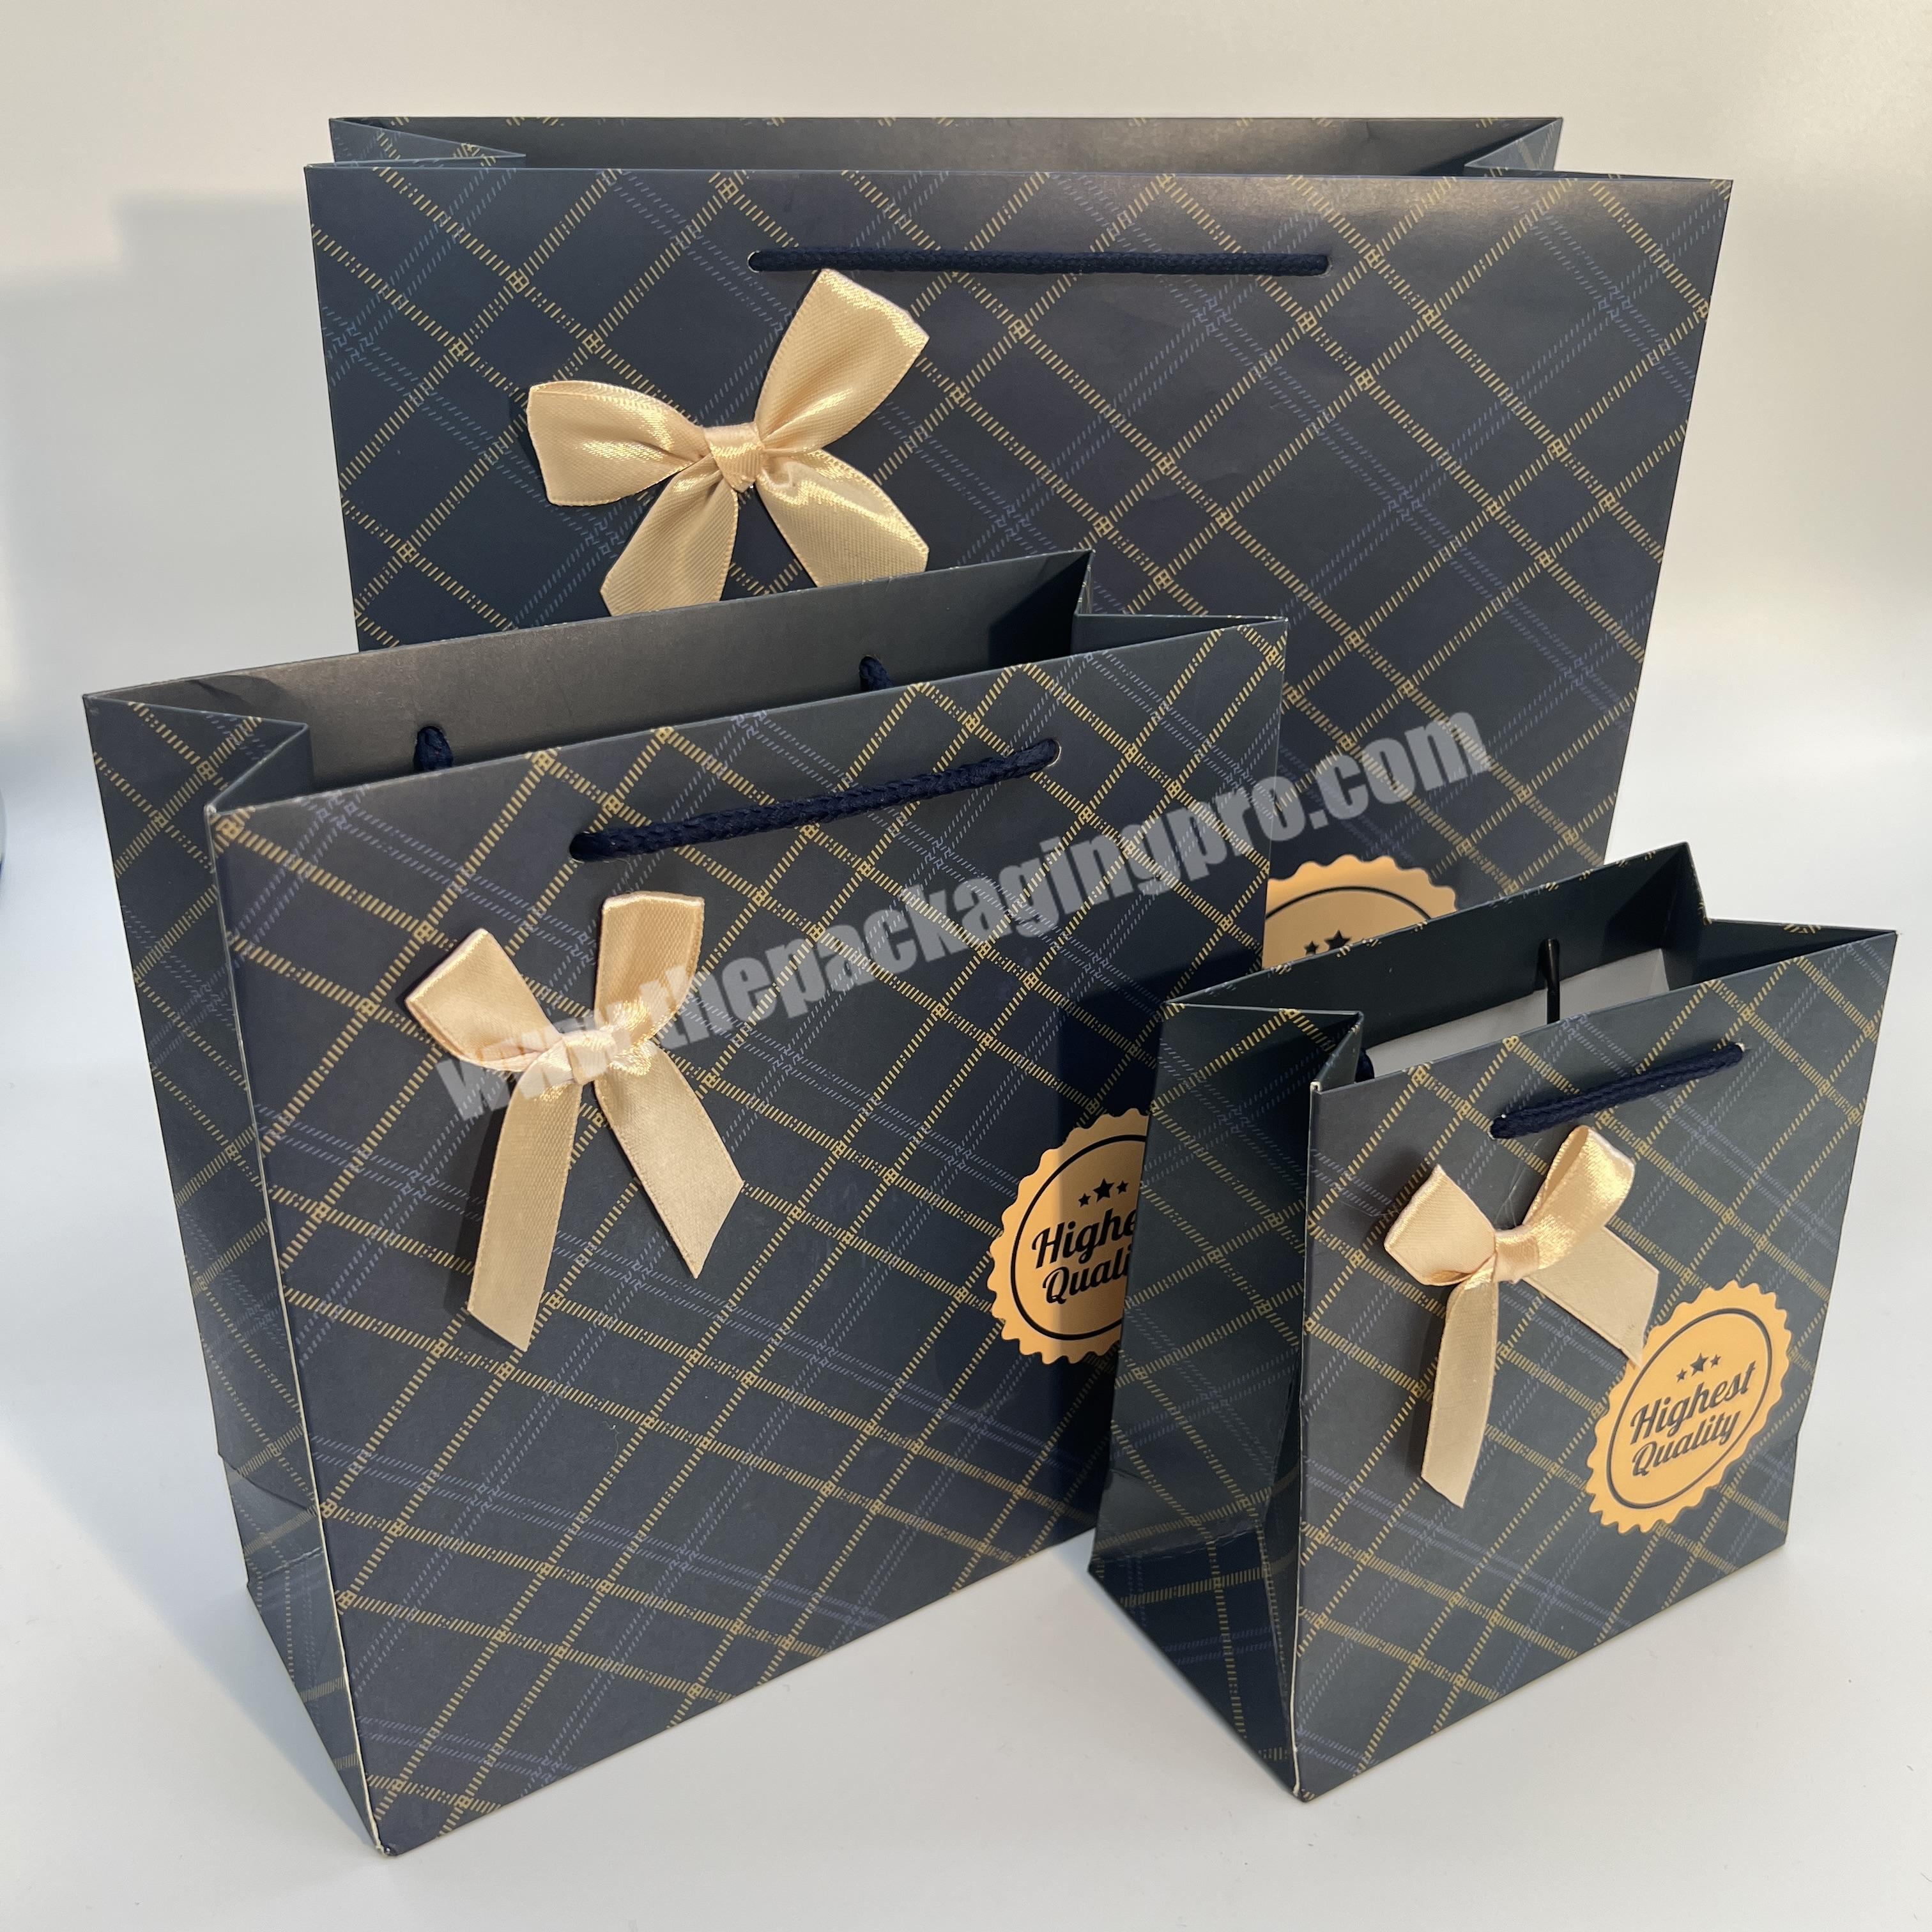 https://thepackagingpro.com/media/images/product/2023/5/Luxury-Gold-Elegant-Gift-Bags-Eco-Shopping-Famous-Brand-Paper-Bag-Ready-to-Ship-with-Bow.jpg